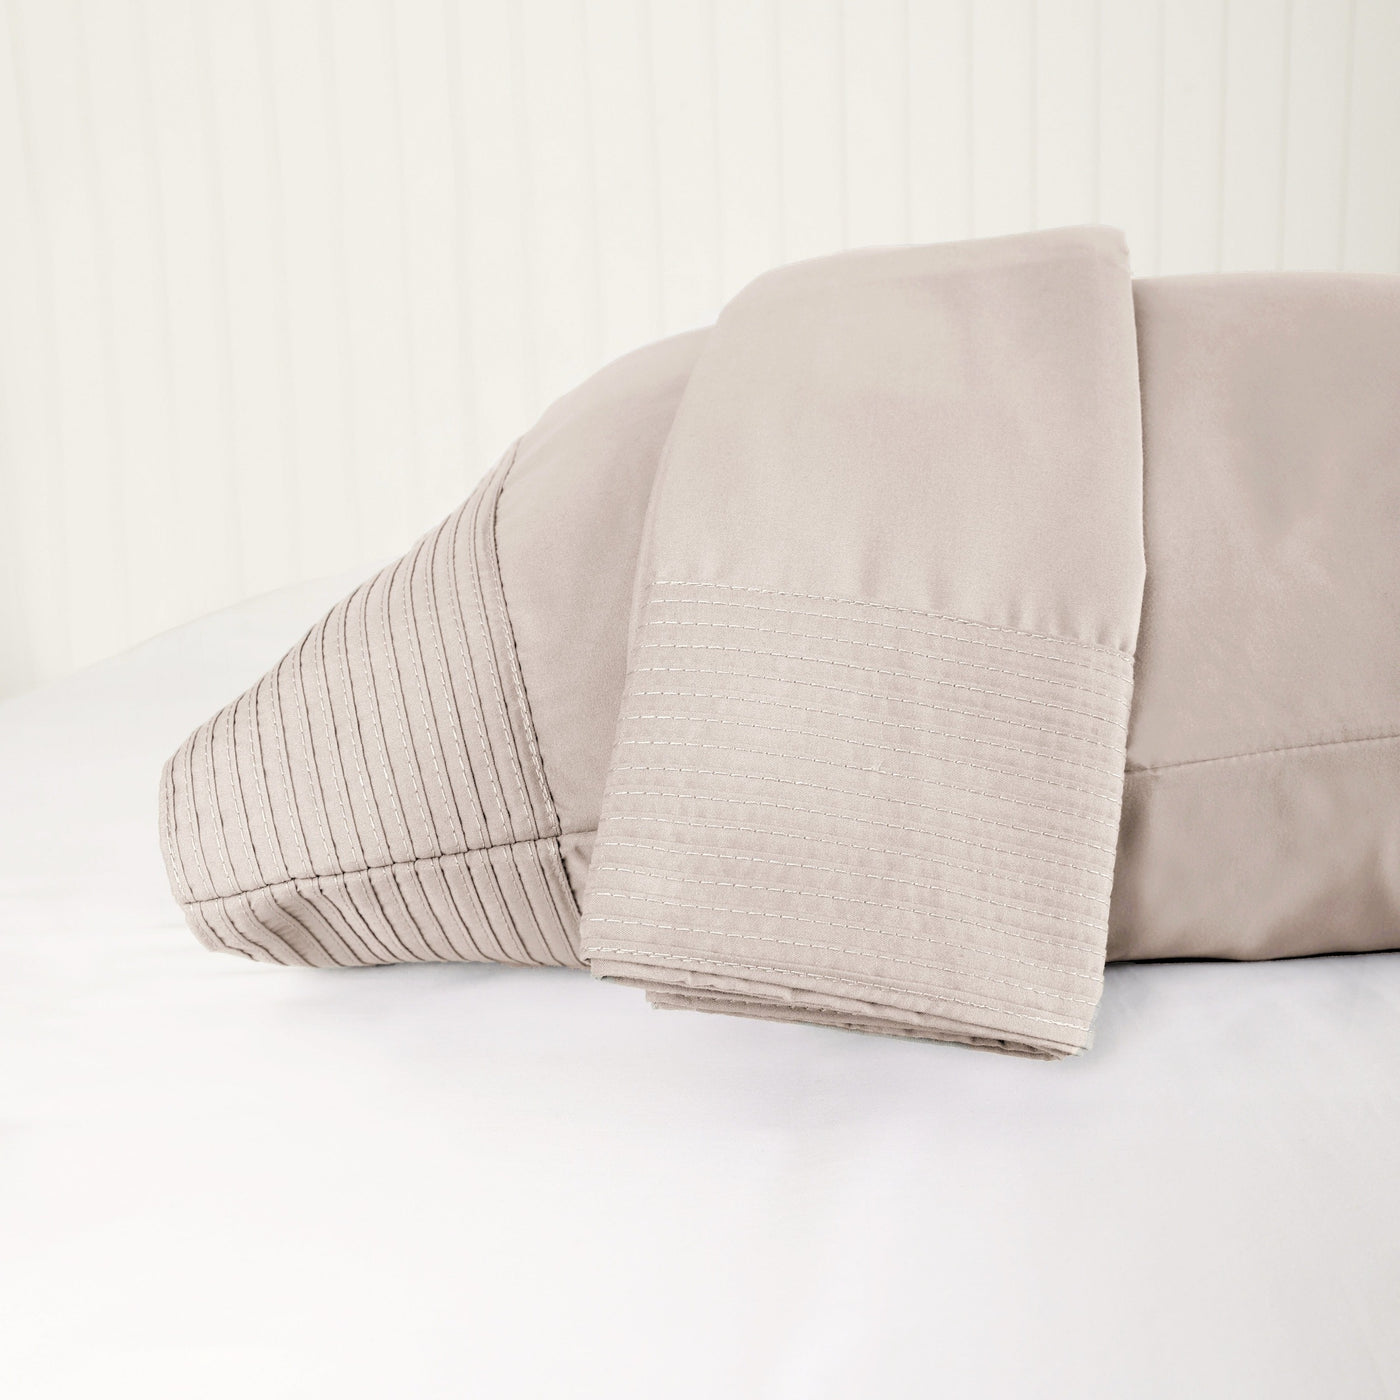 Details and Texture of Vilano Pleated Pillow Cases in Bone#color_vilano-bone